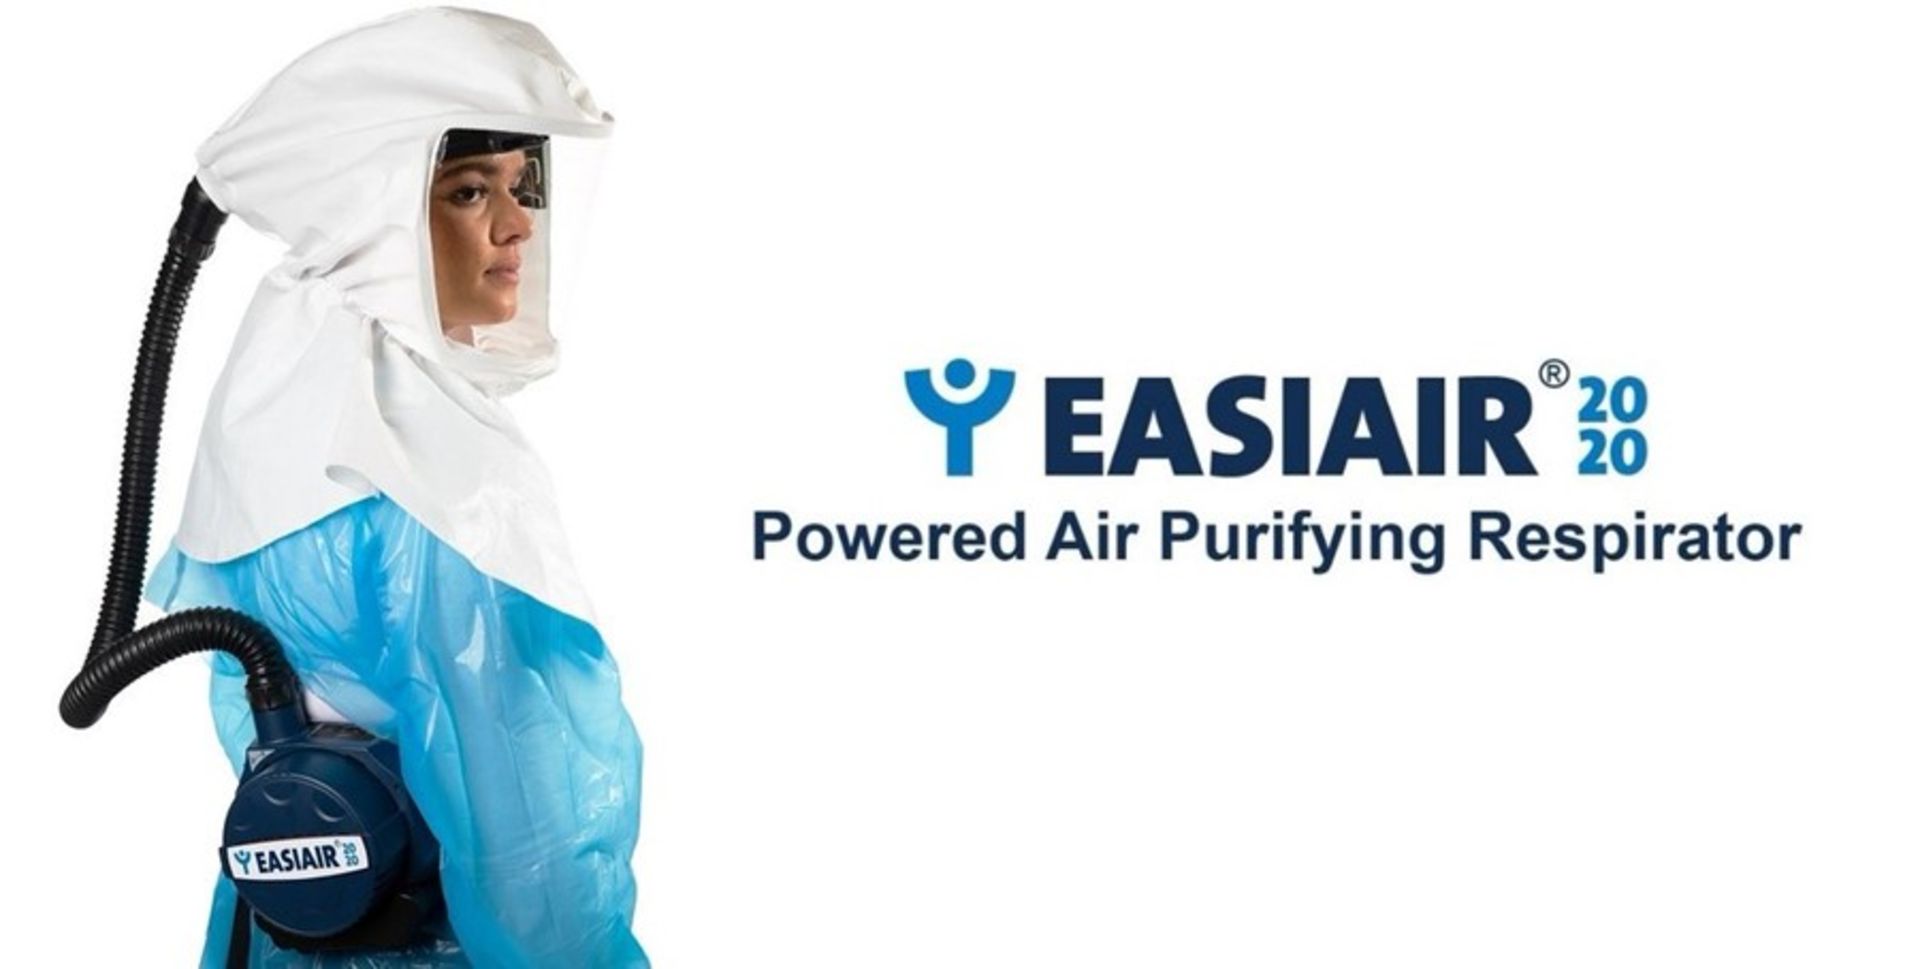 1 LOT TO CONTAIN AN AS NEW BOXED EASIAIR 2020 POWERED AIR PURIFYING RESPIRATOR KIT/ FILTER EXPIRES